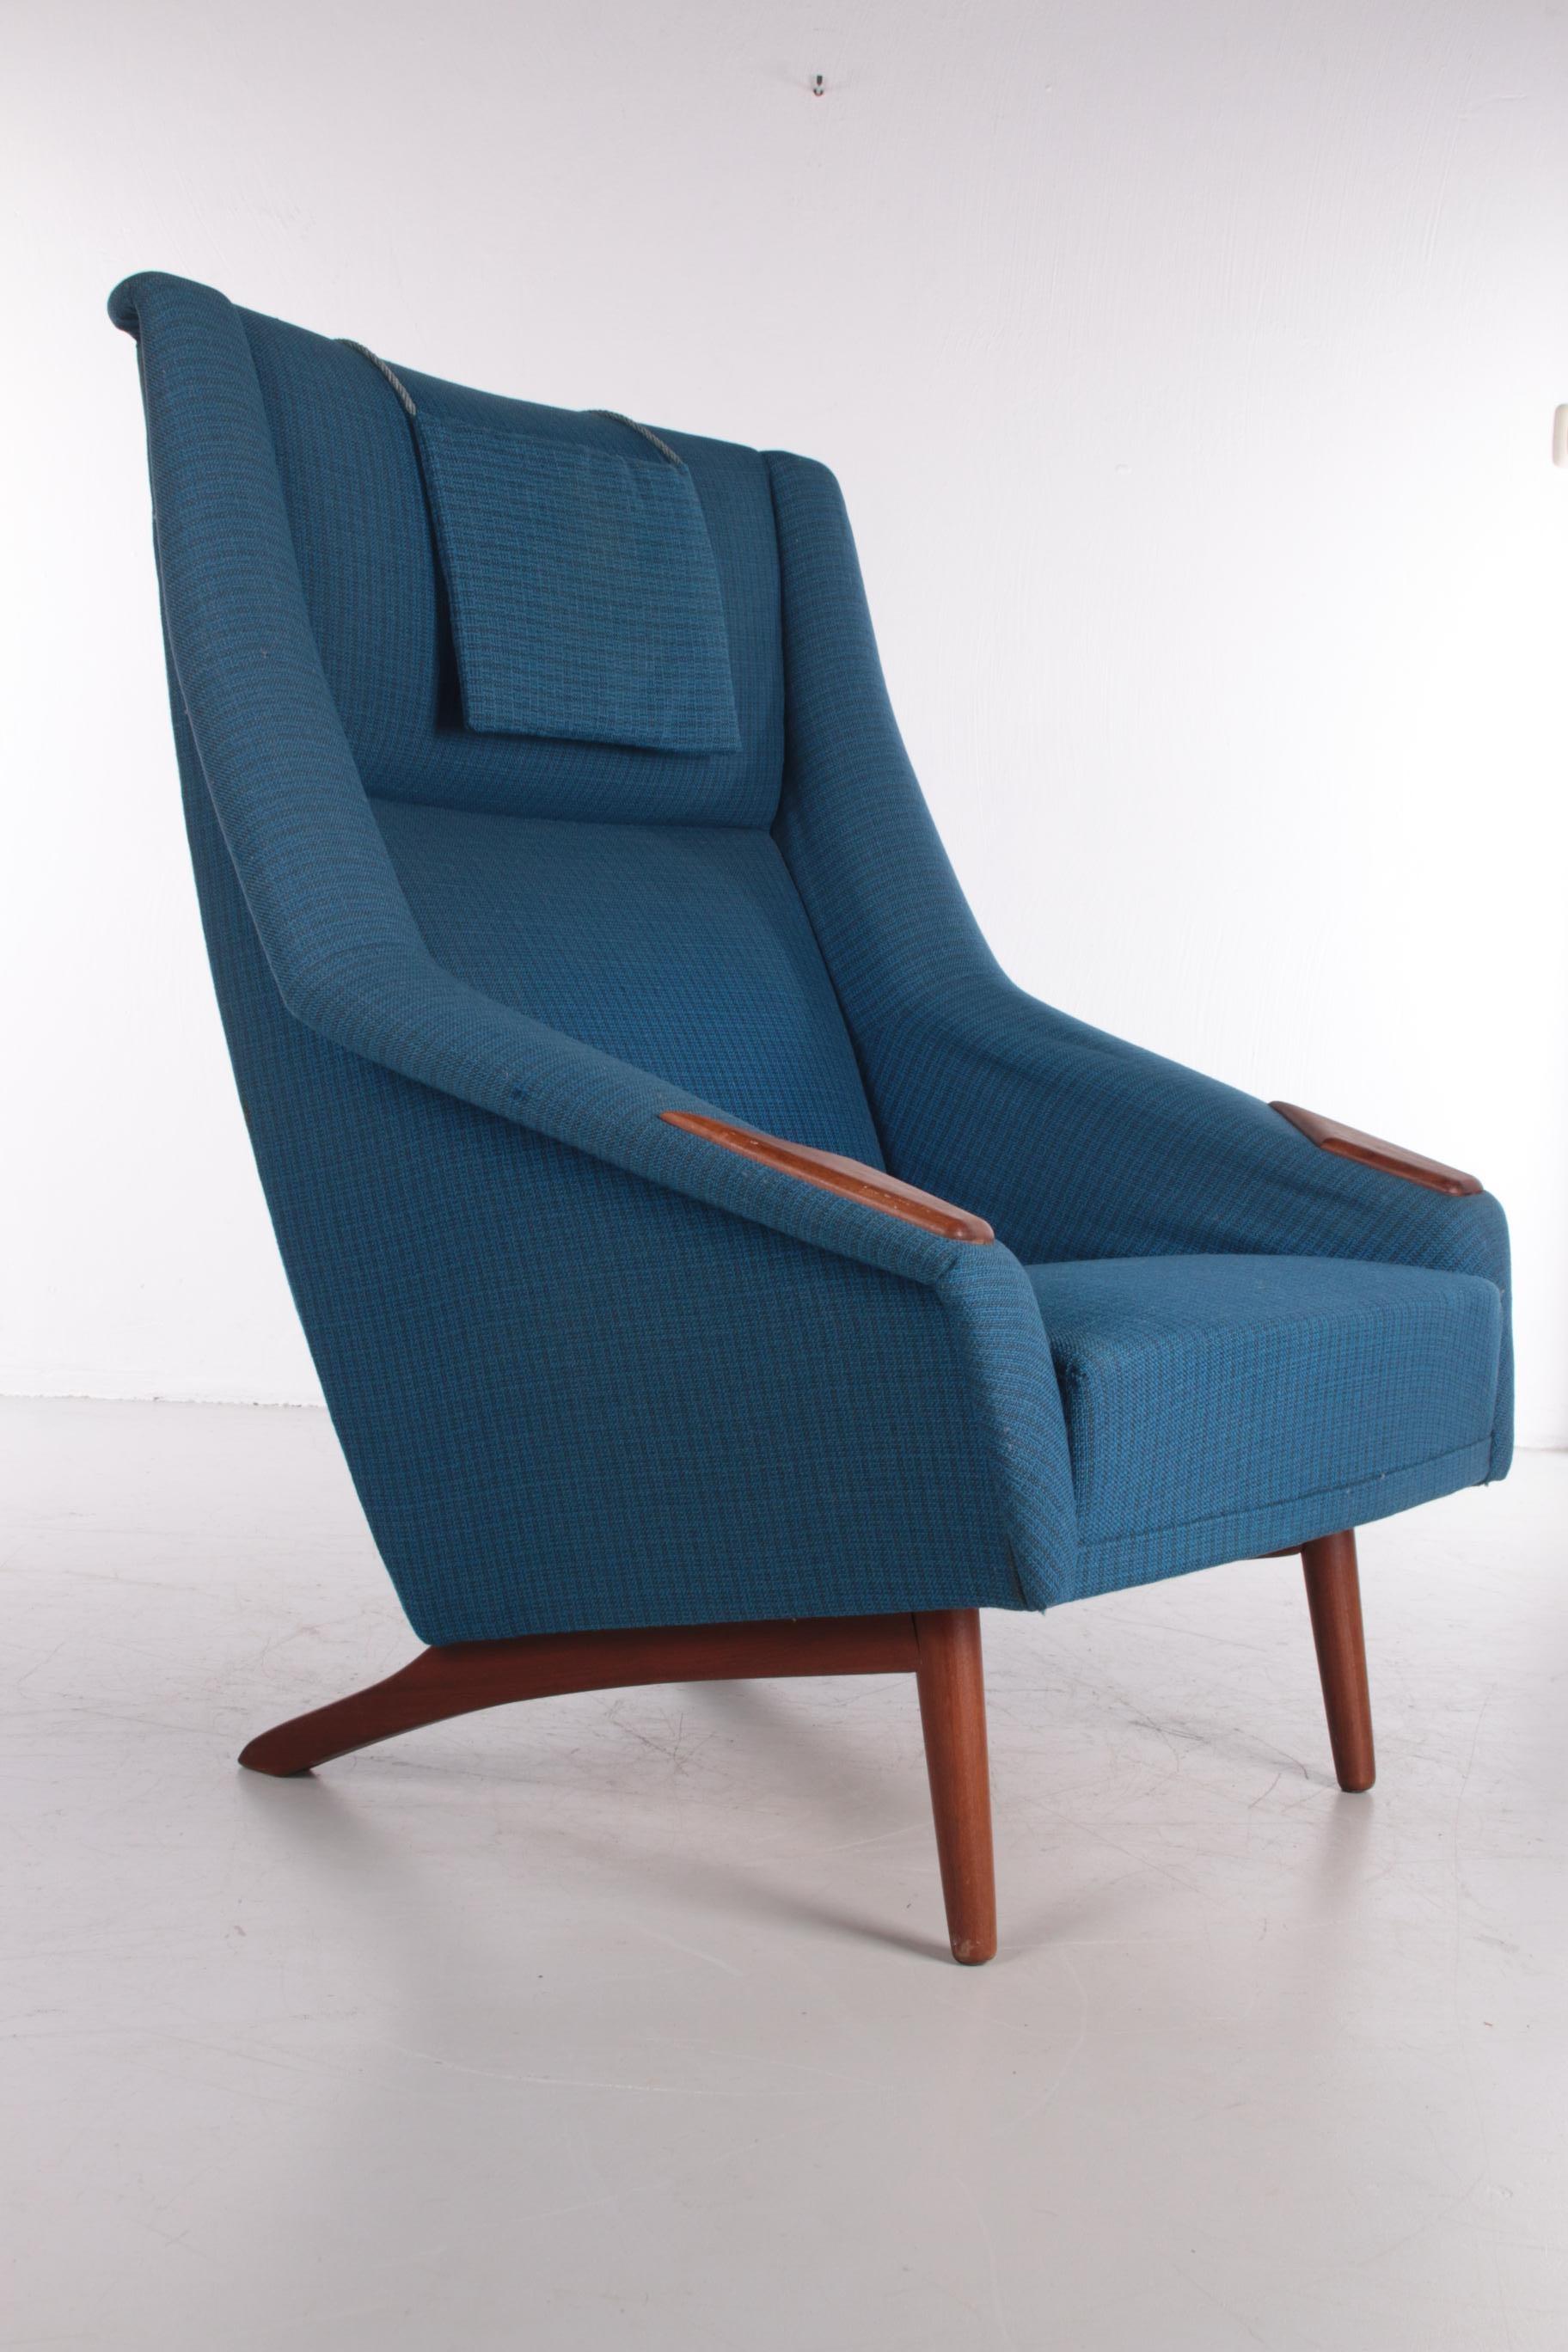 Mid-20th Century Relaxing Chair Folke Ohlsson Made by Fritz Hansen